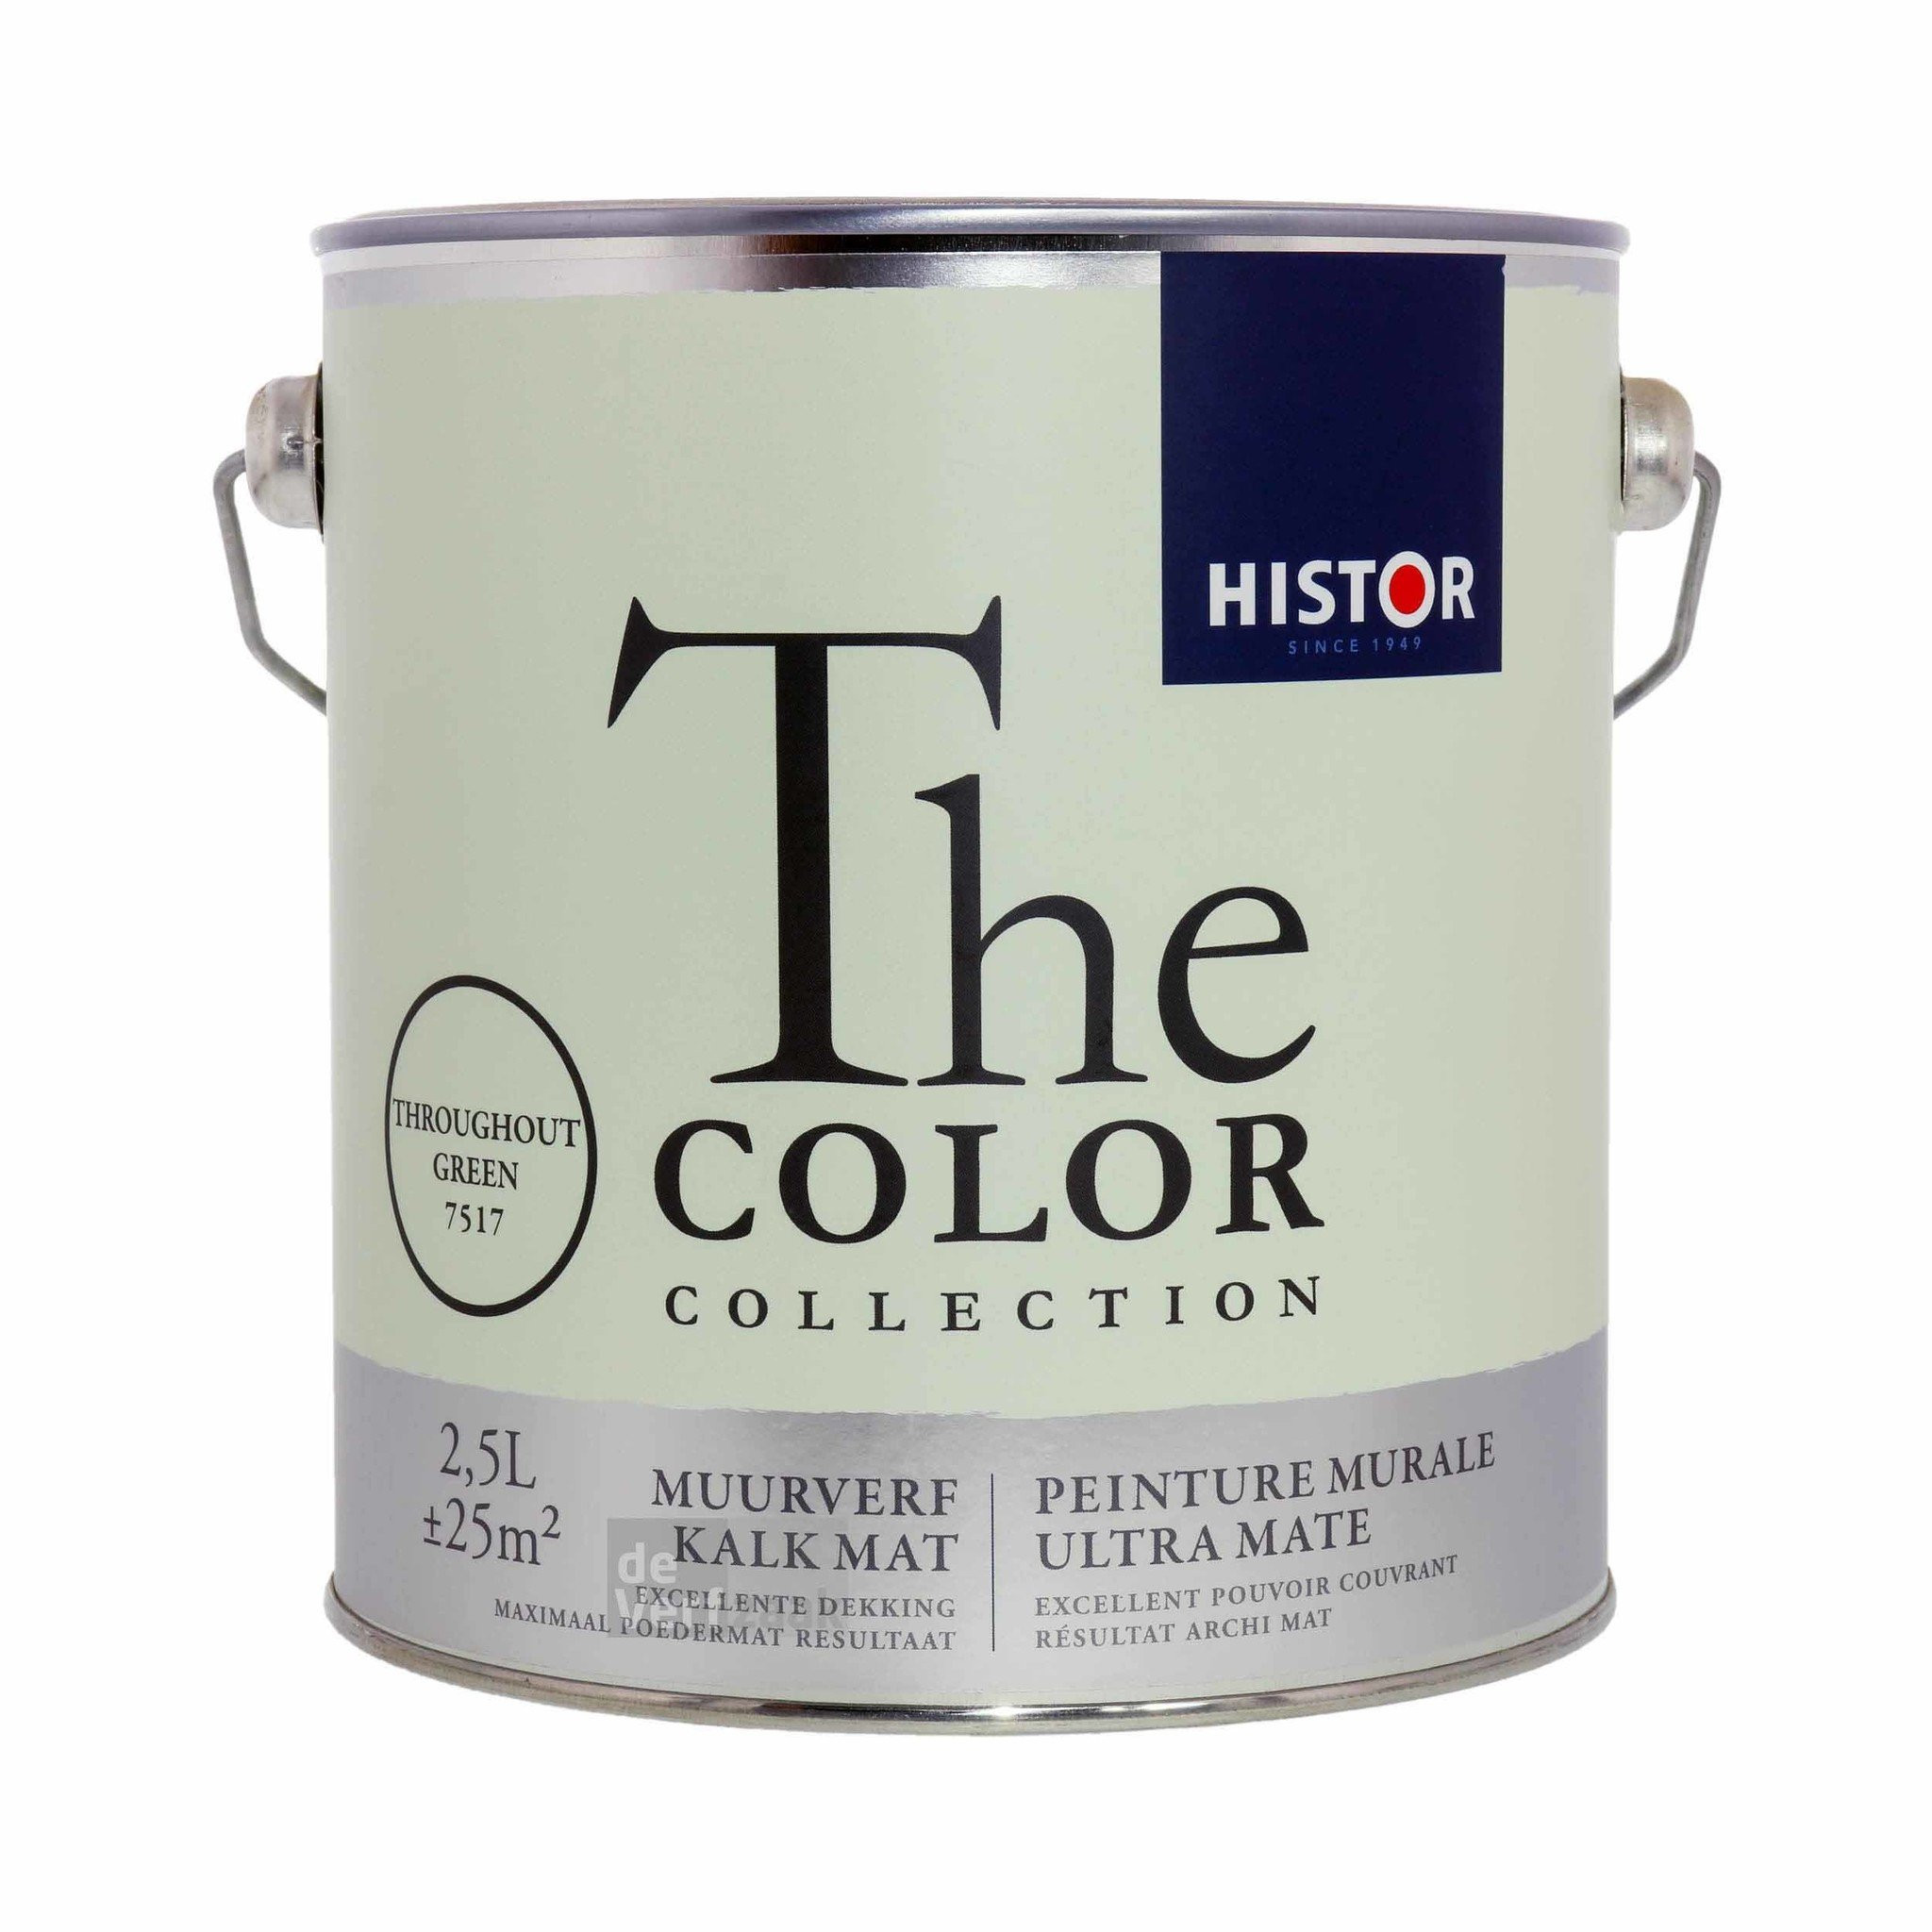 Histor The Color Collection Muurverf Kalkmat - Throughout Green - 2,5 liter